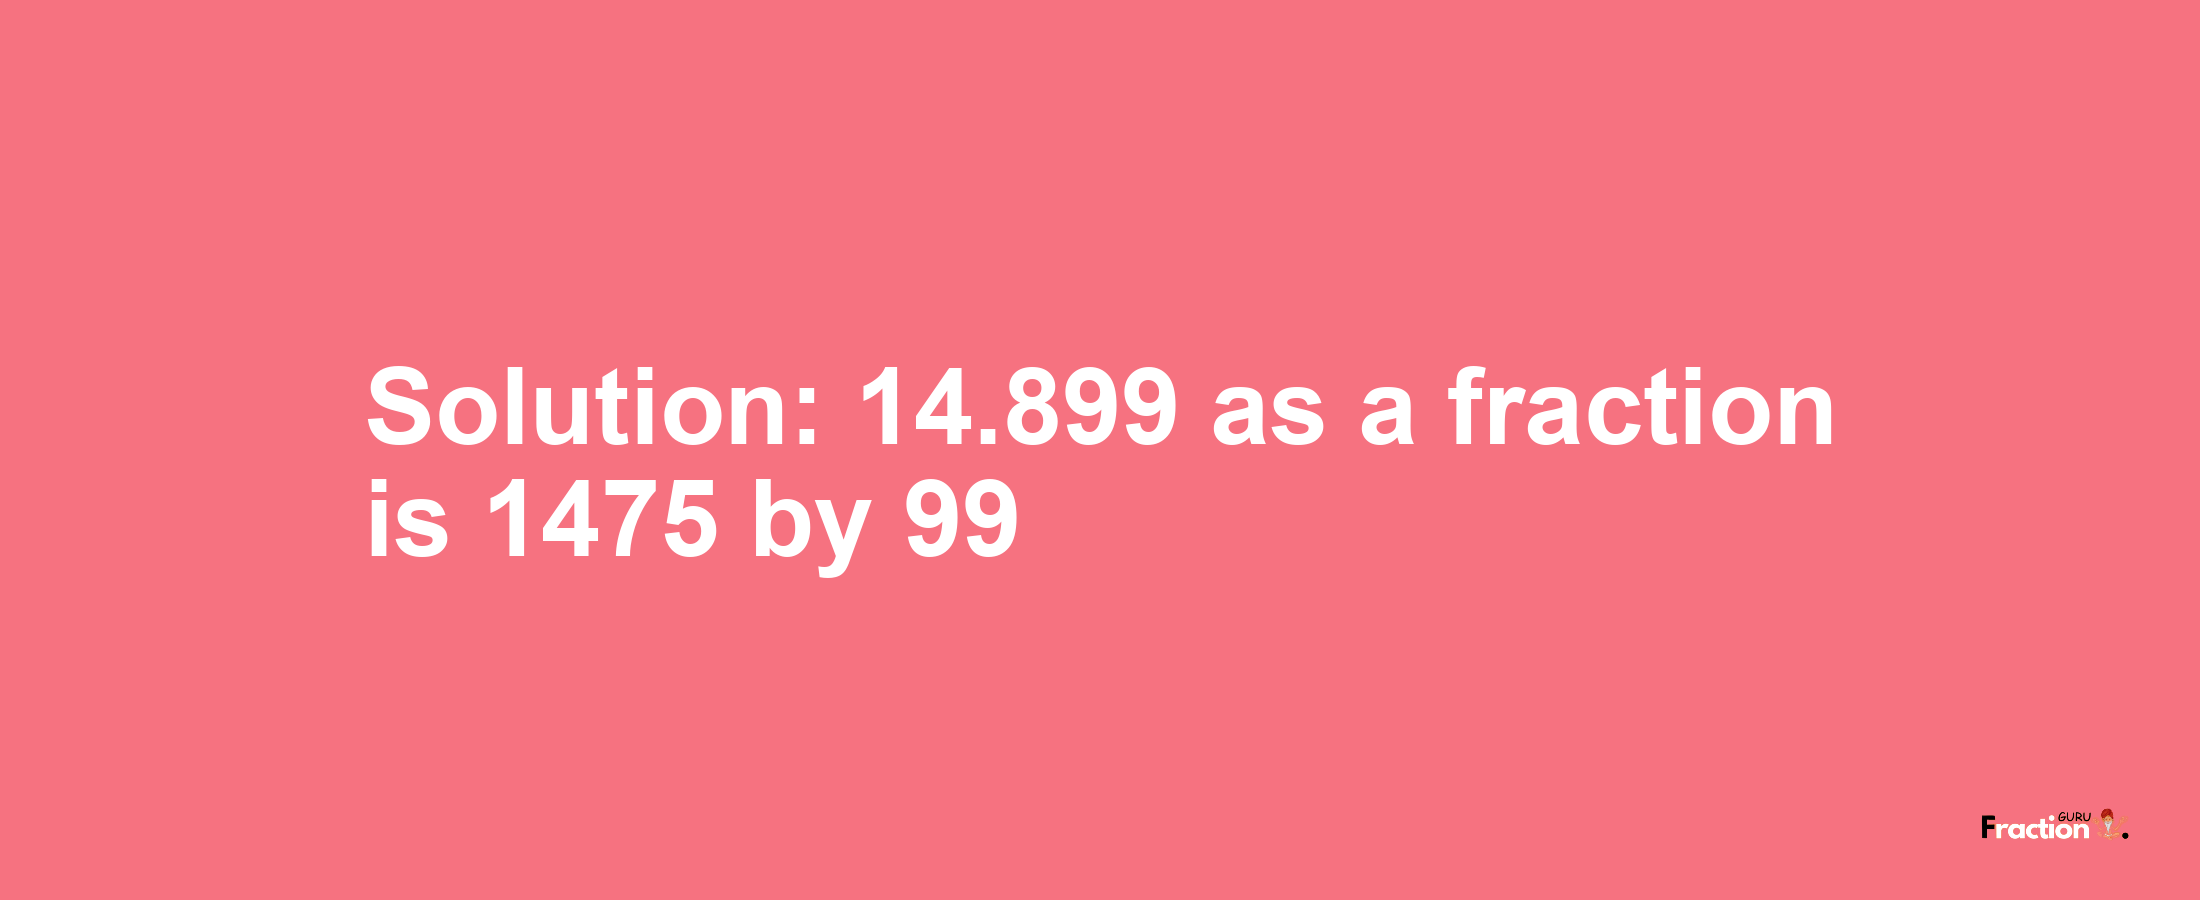 Solution:14.899 as a fraction is 1475/99